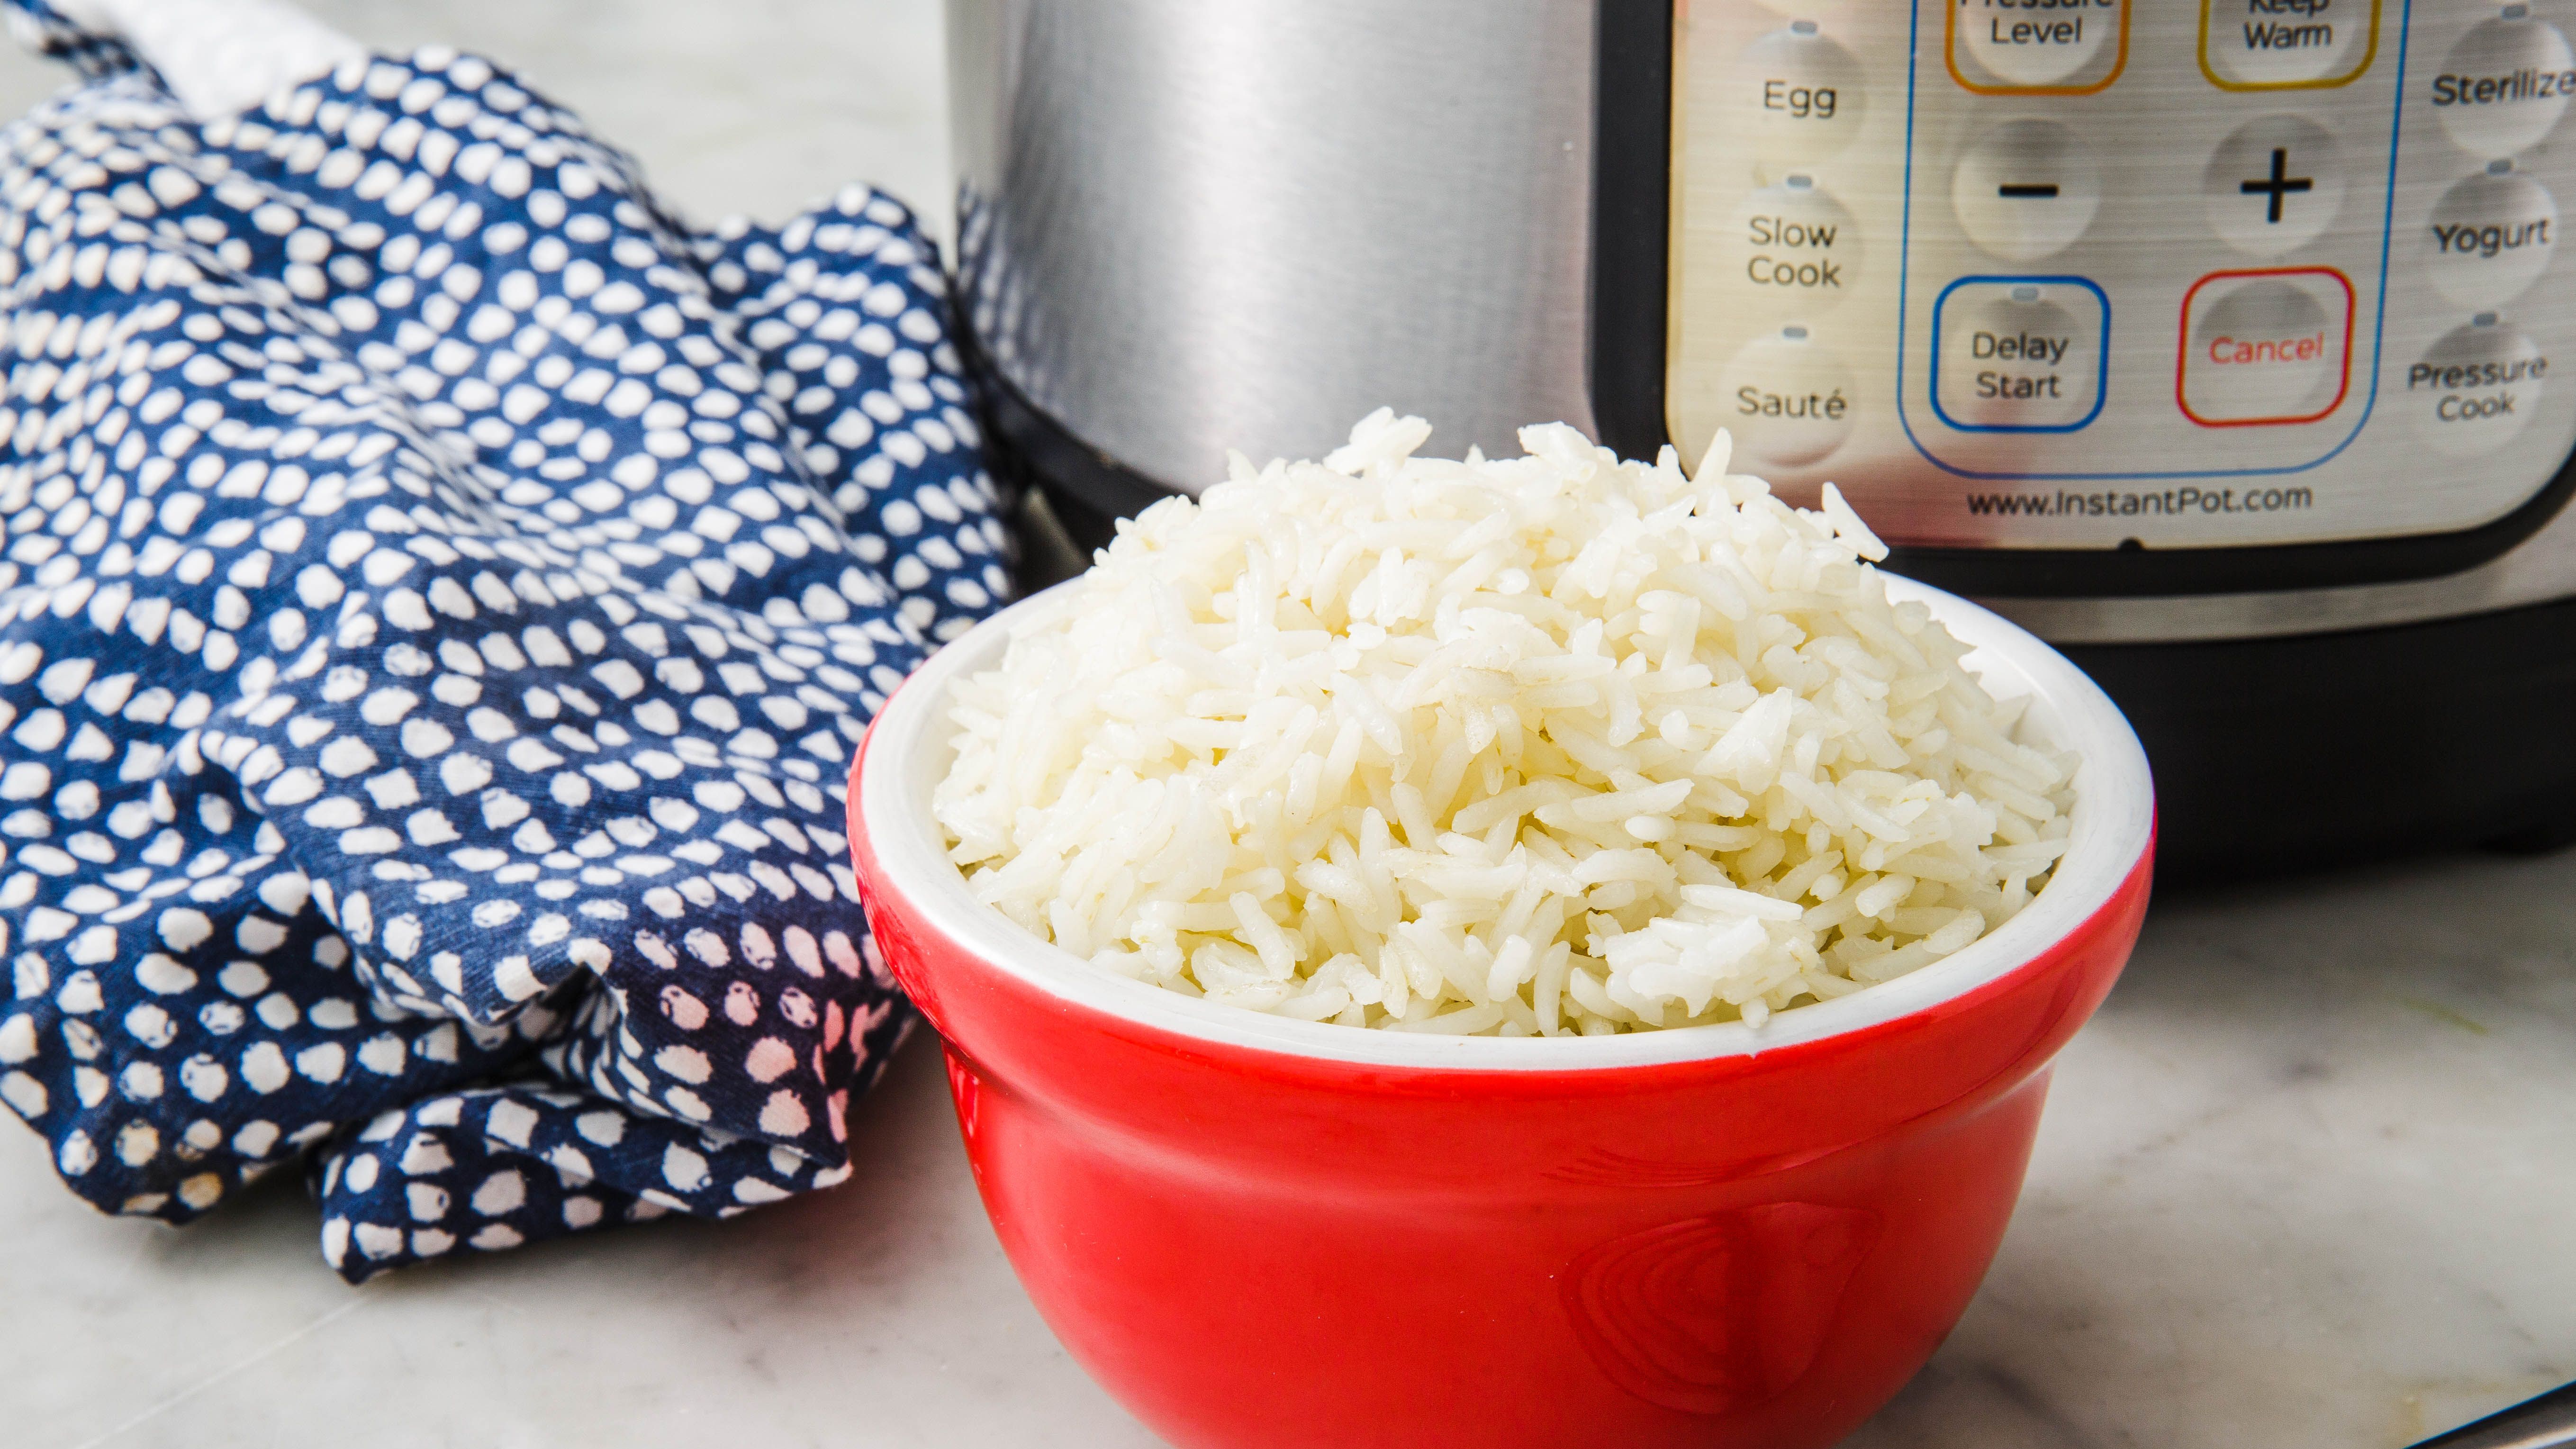 Best Instant Pot Rice Recipe - How to Make Instant Pot Rice